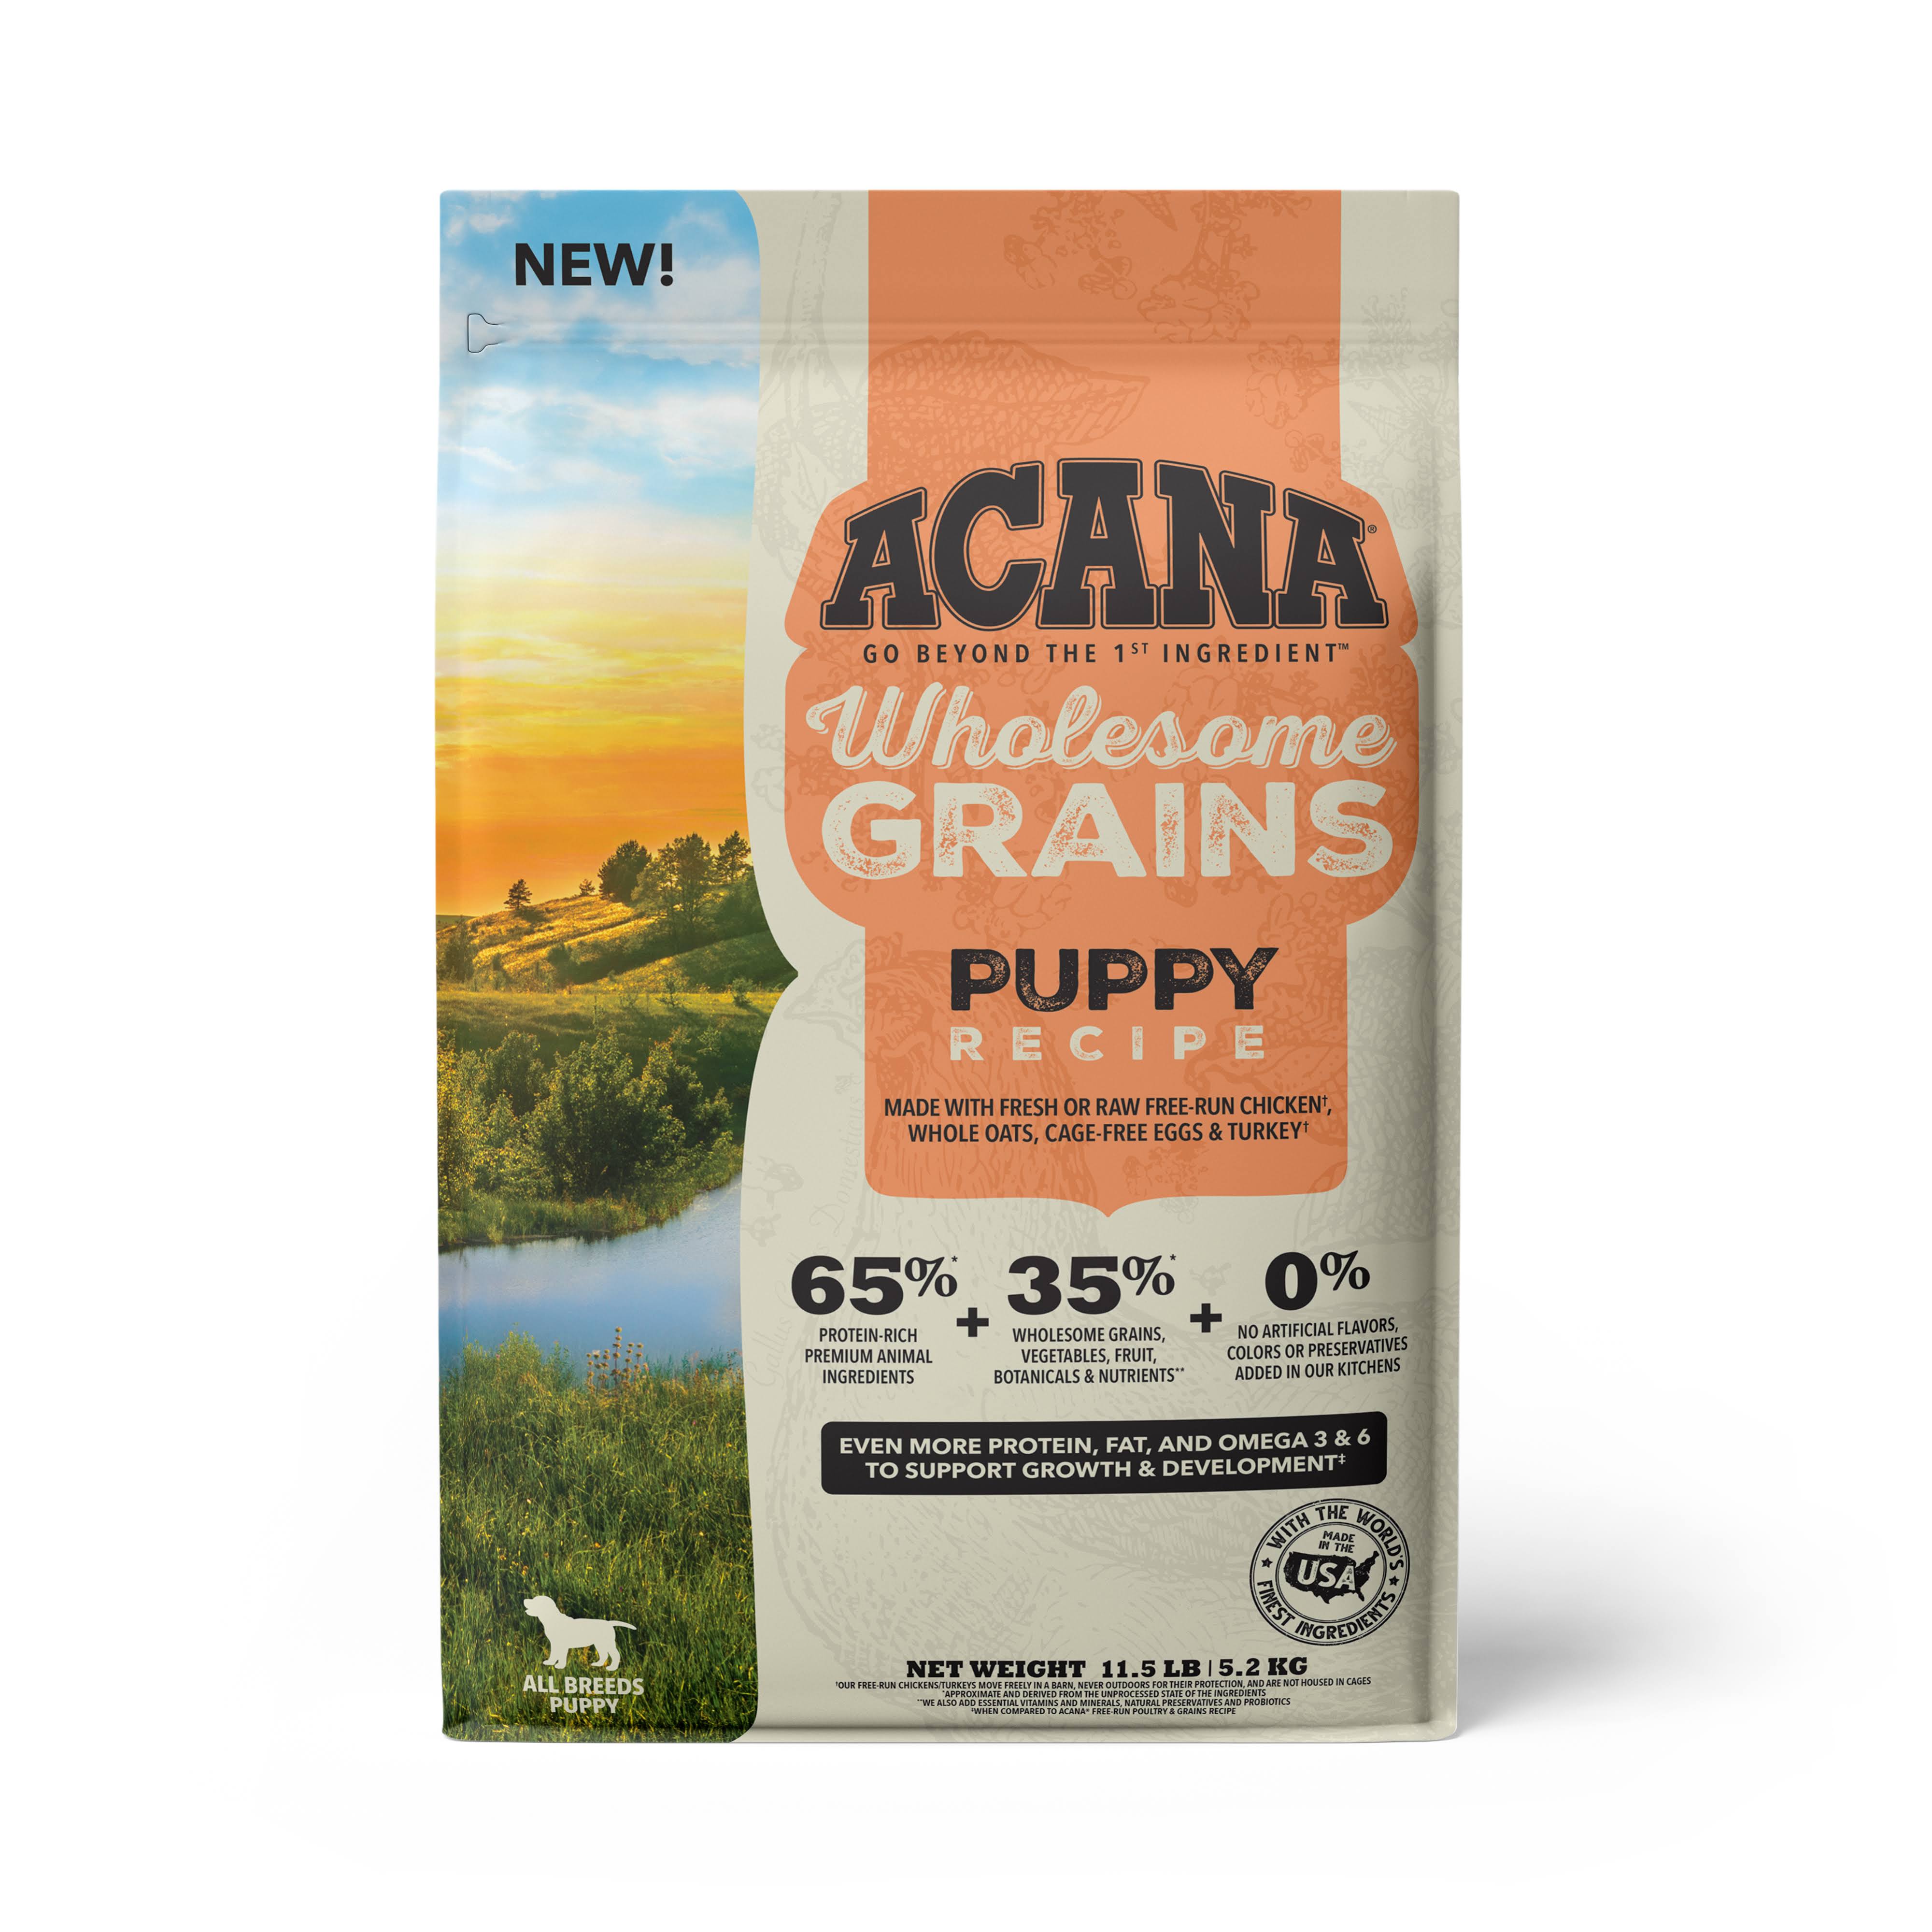 ACANA Wholesome Grains Puppy Recipe Dry Dog Food - 11.5 lb